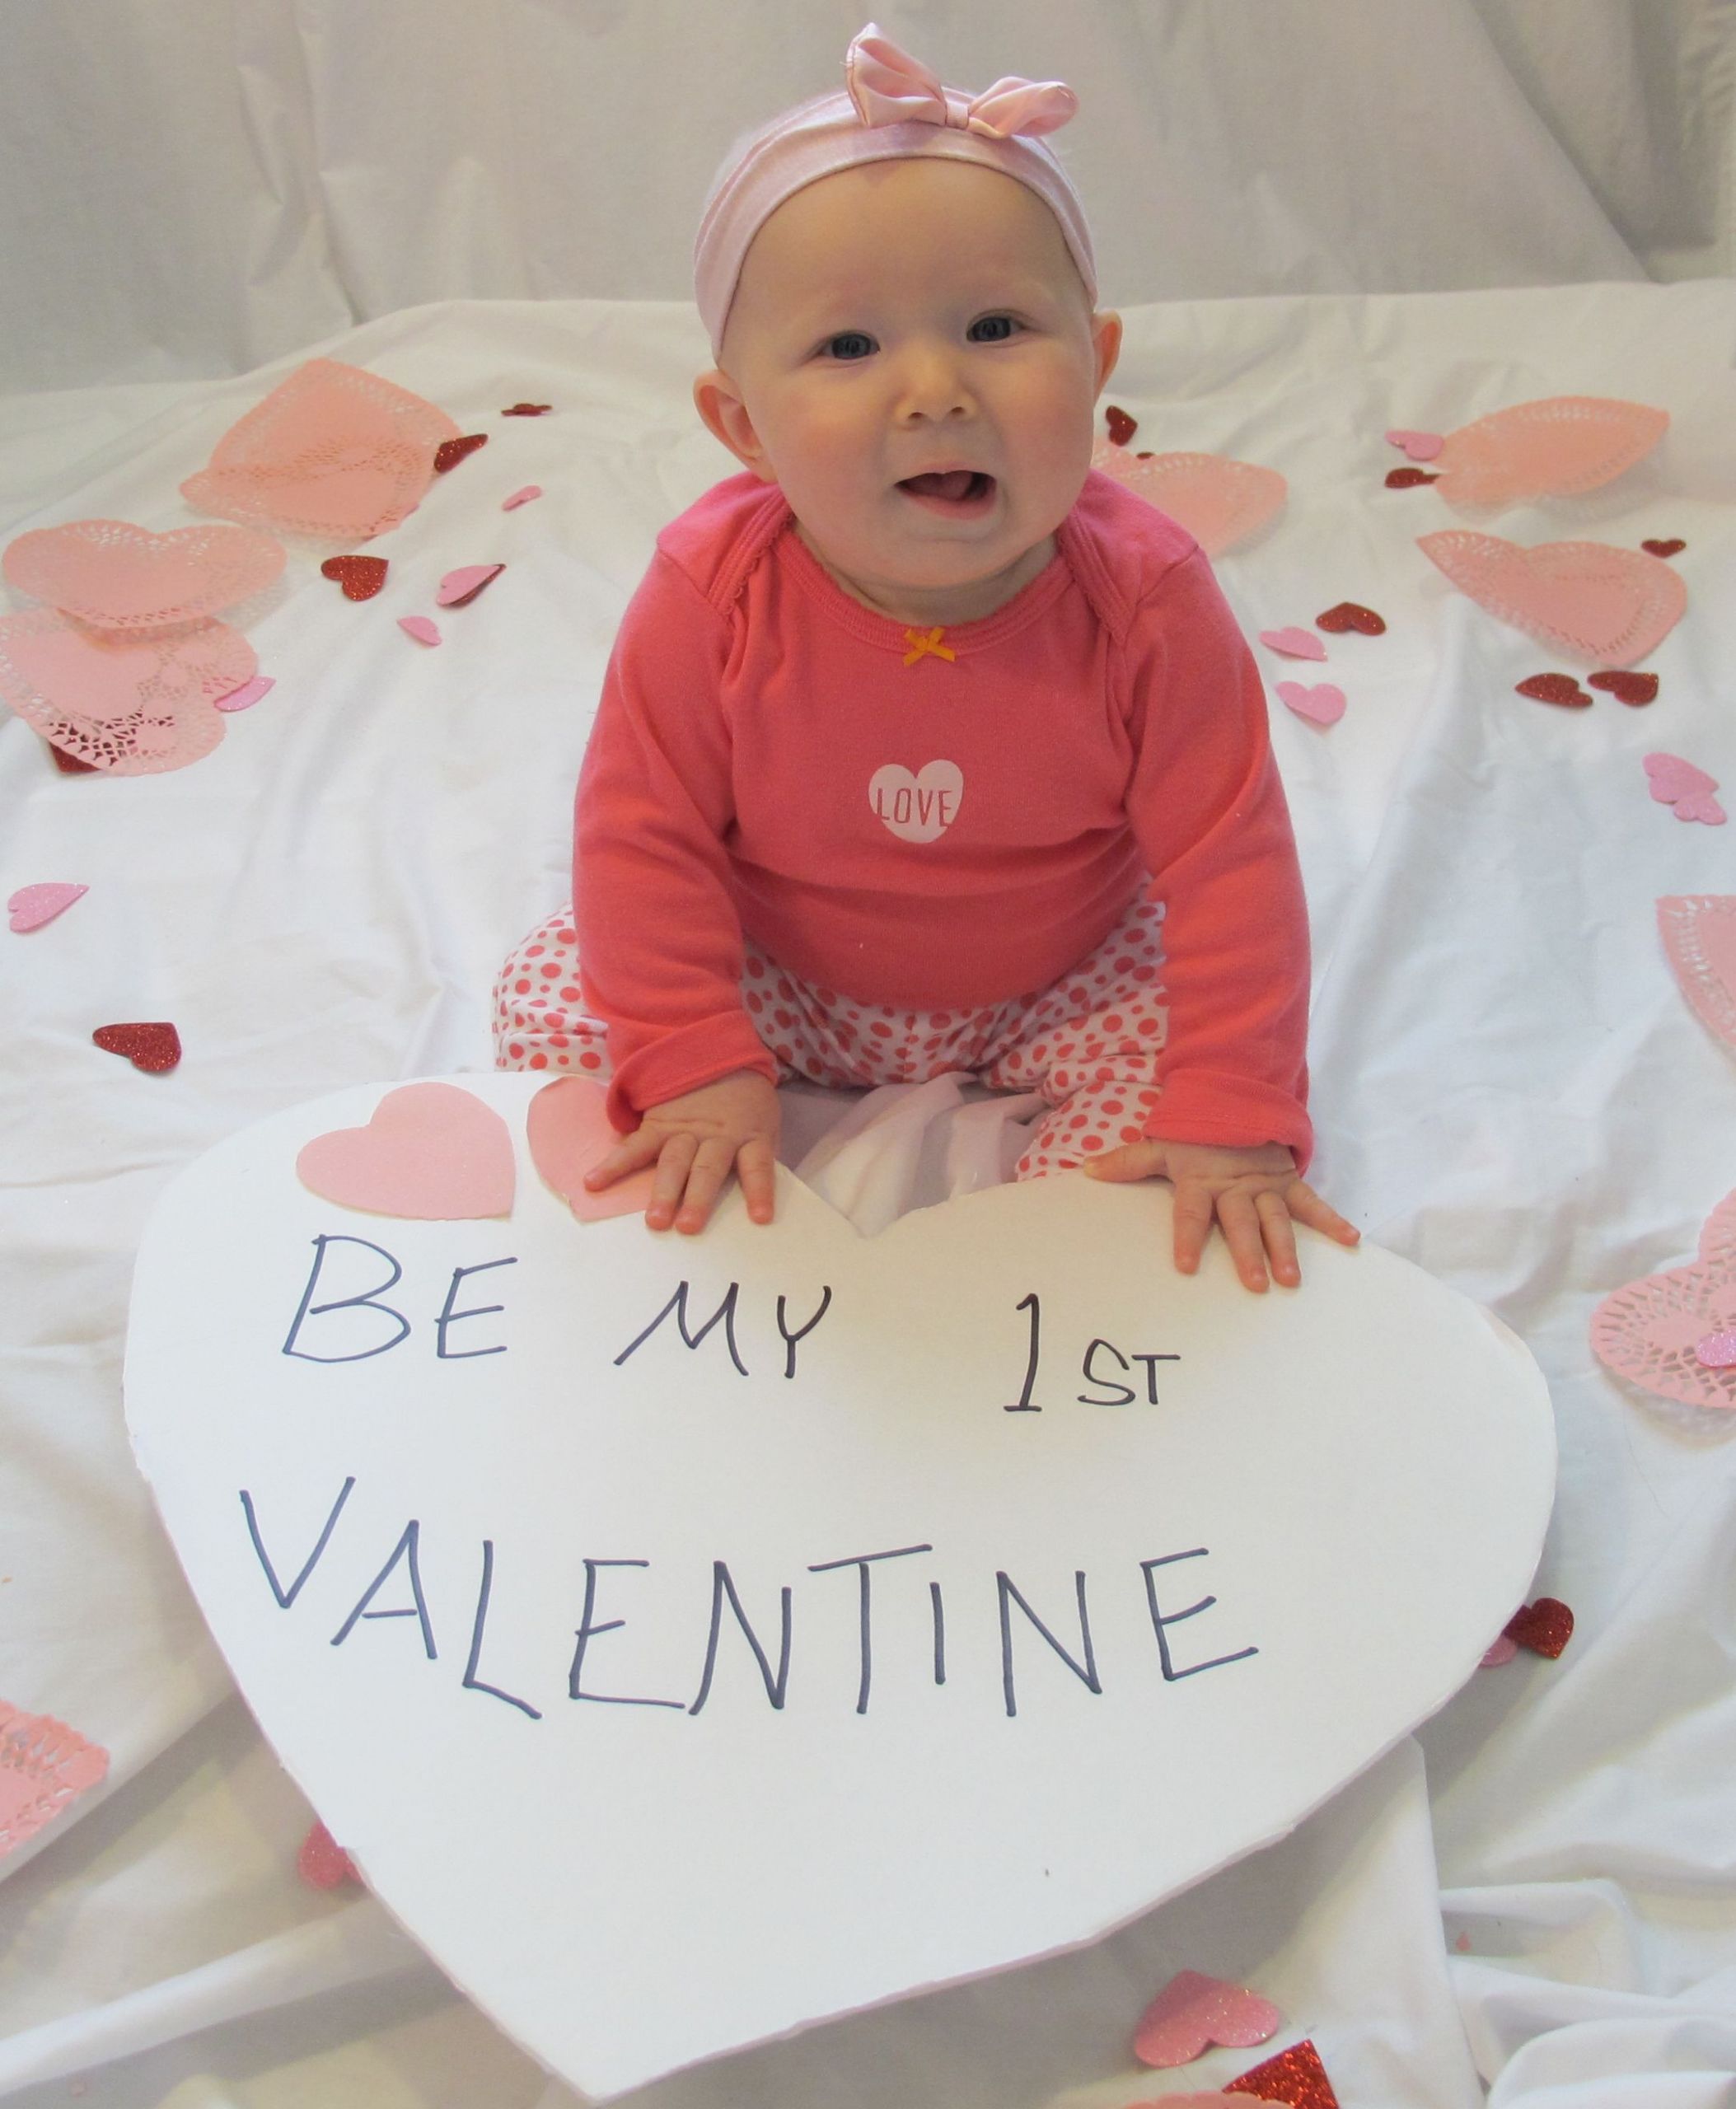 Valentine Gift Ideas For Baby
 Baby s first Valentine s day with dollar store decor